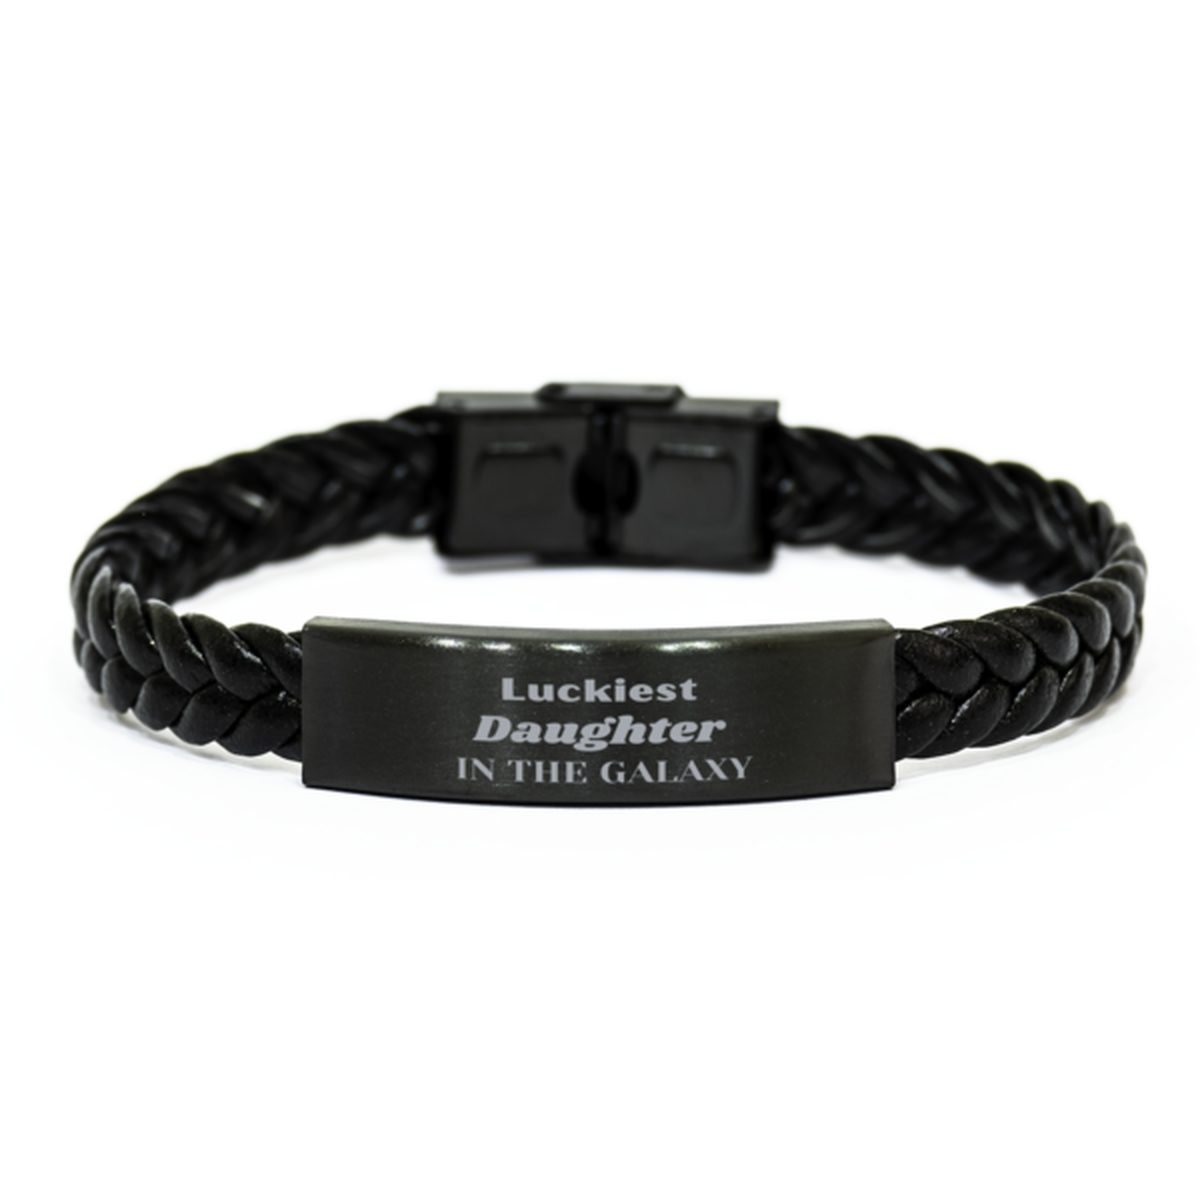 Luckiest Daughter in the Galaxy, To My Daughter Engraved Gifts, Christmas Daughter Braided Leather Bracelet Gifts, X-mas Birthday Unique Gifts For Daughter Men Women